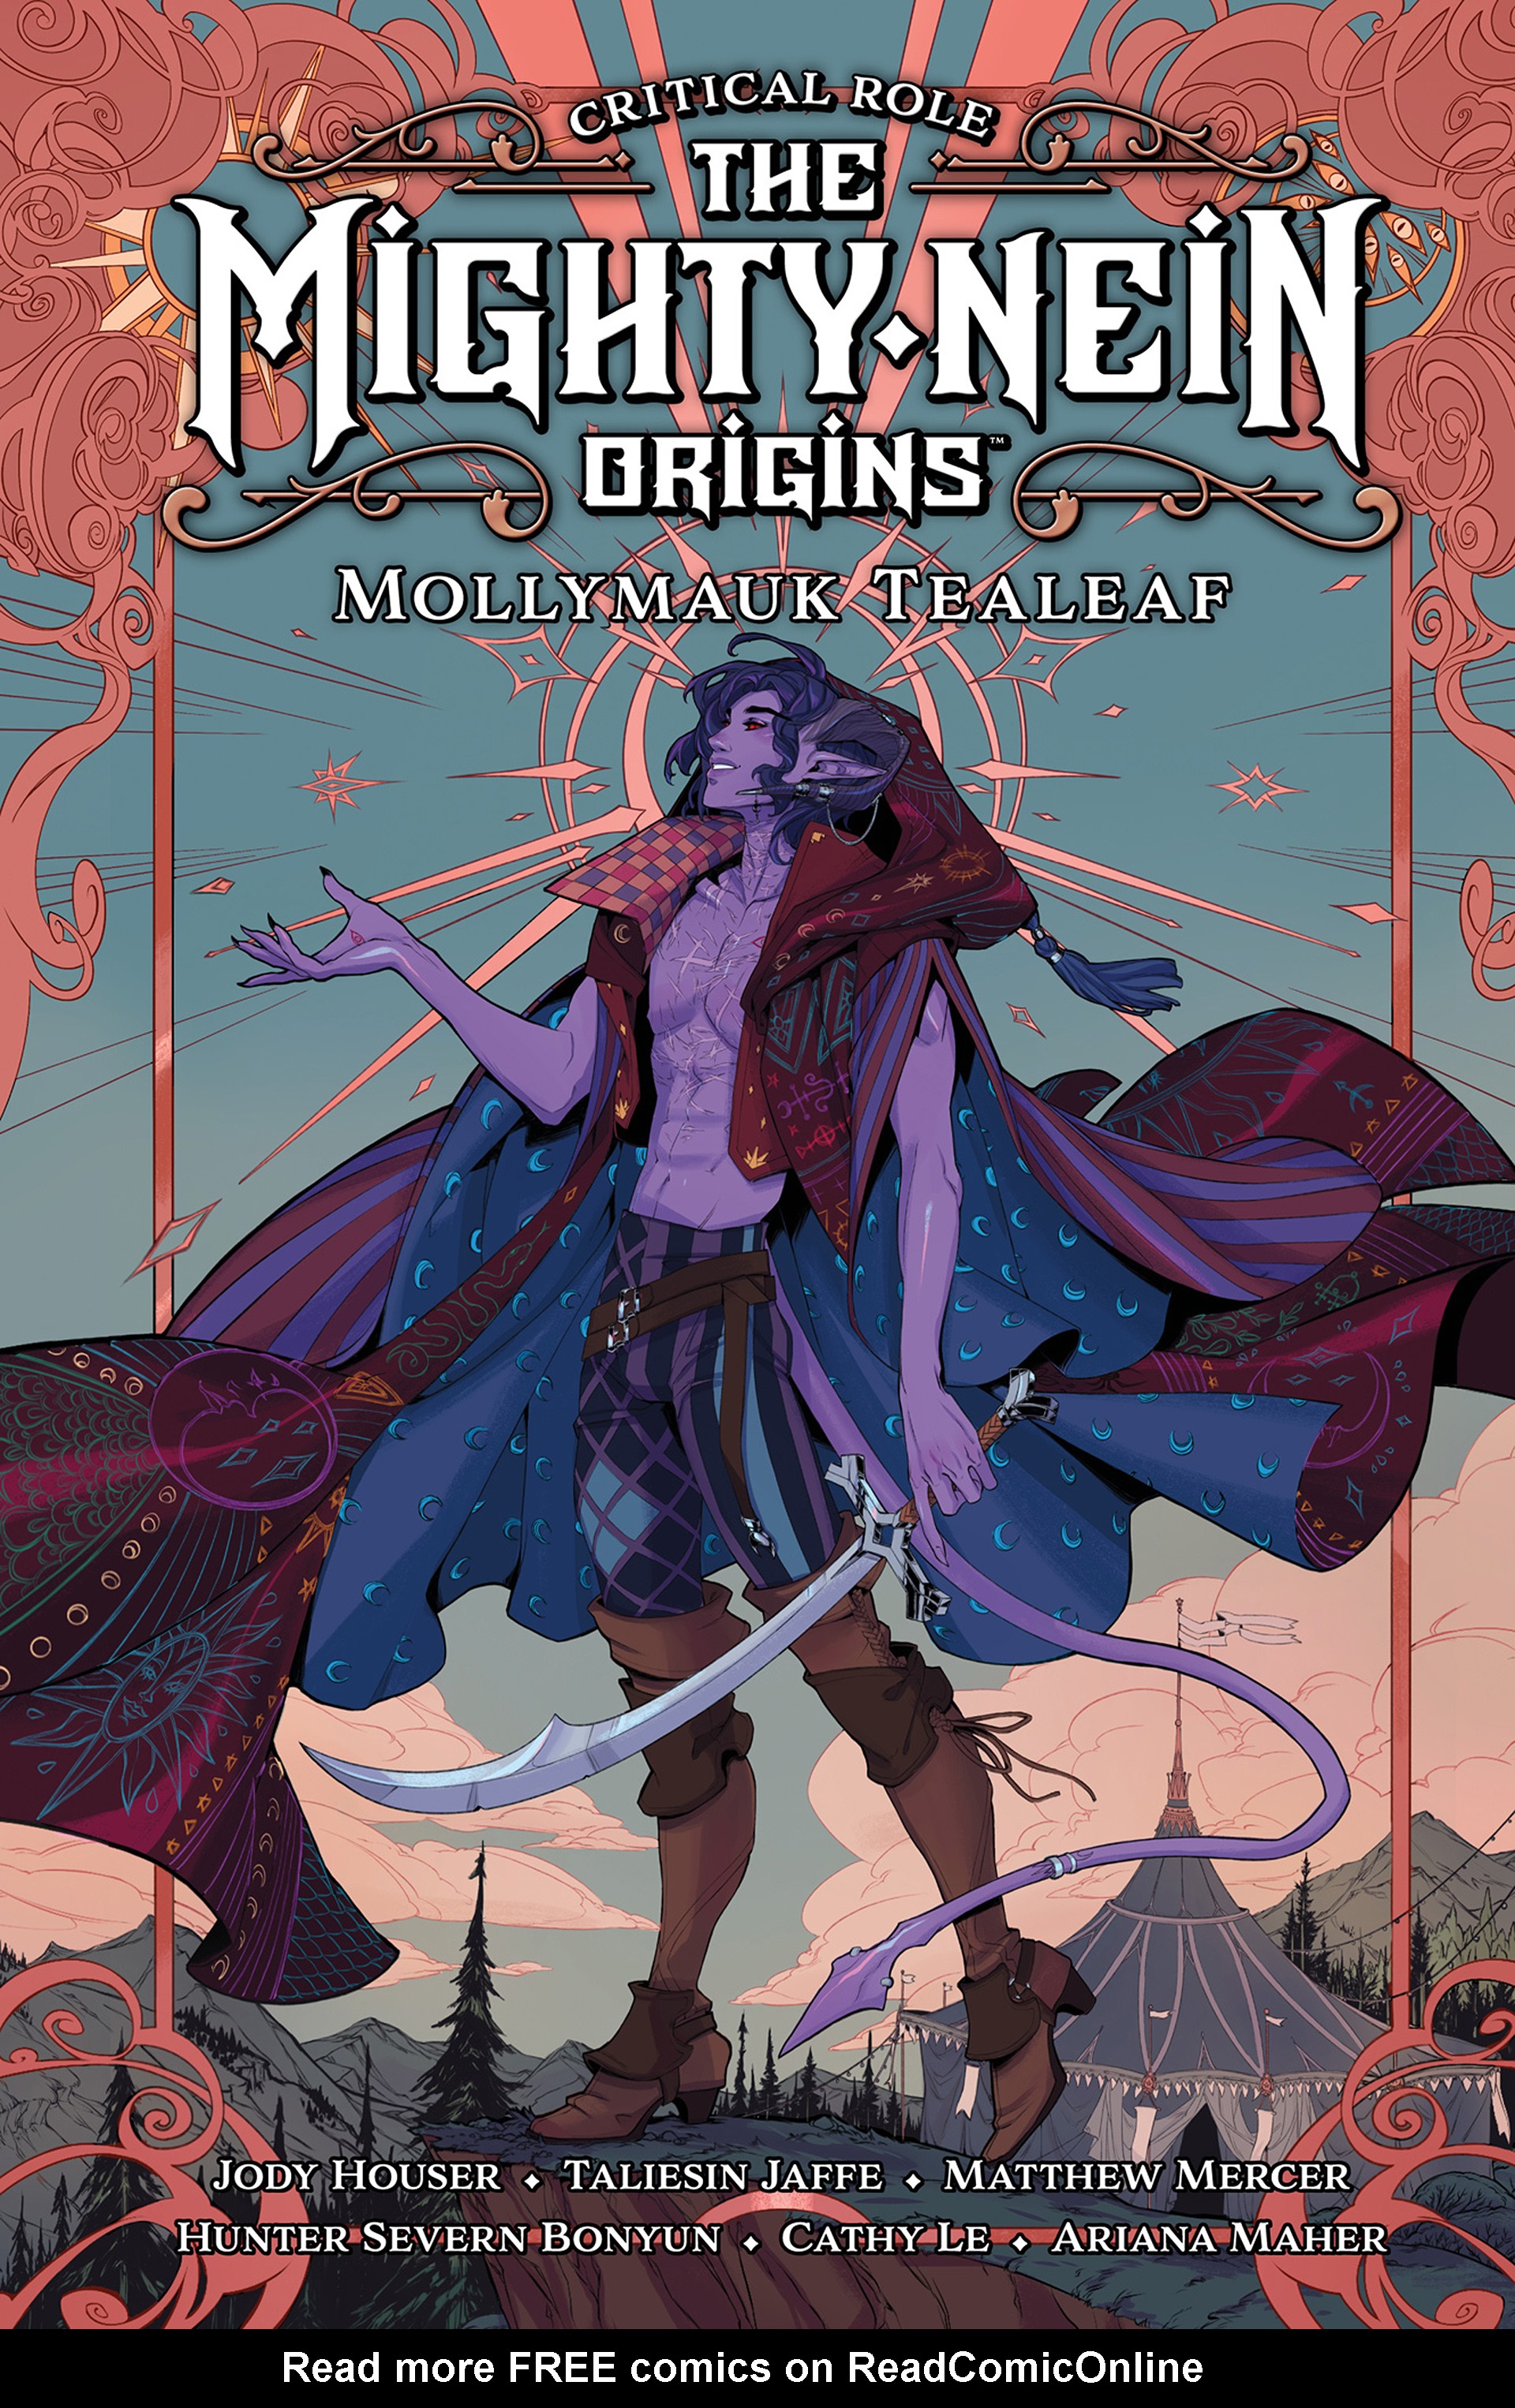 Read online Critical Role: The Mighty Nein Origins - Mollymauk Tealeaf comic -  Issue # Full - 1